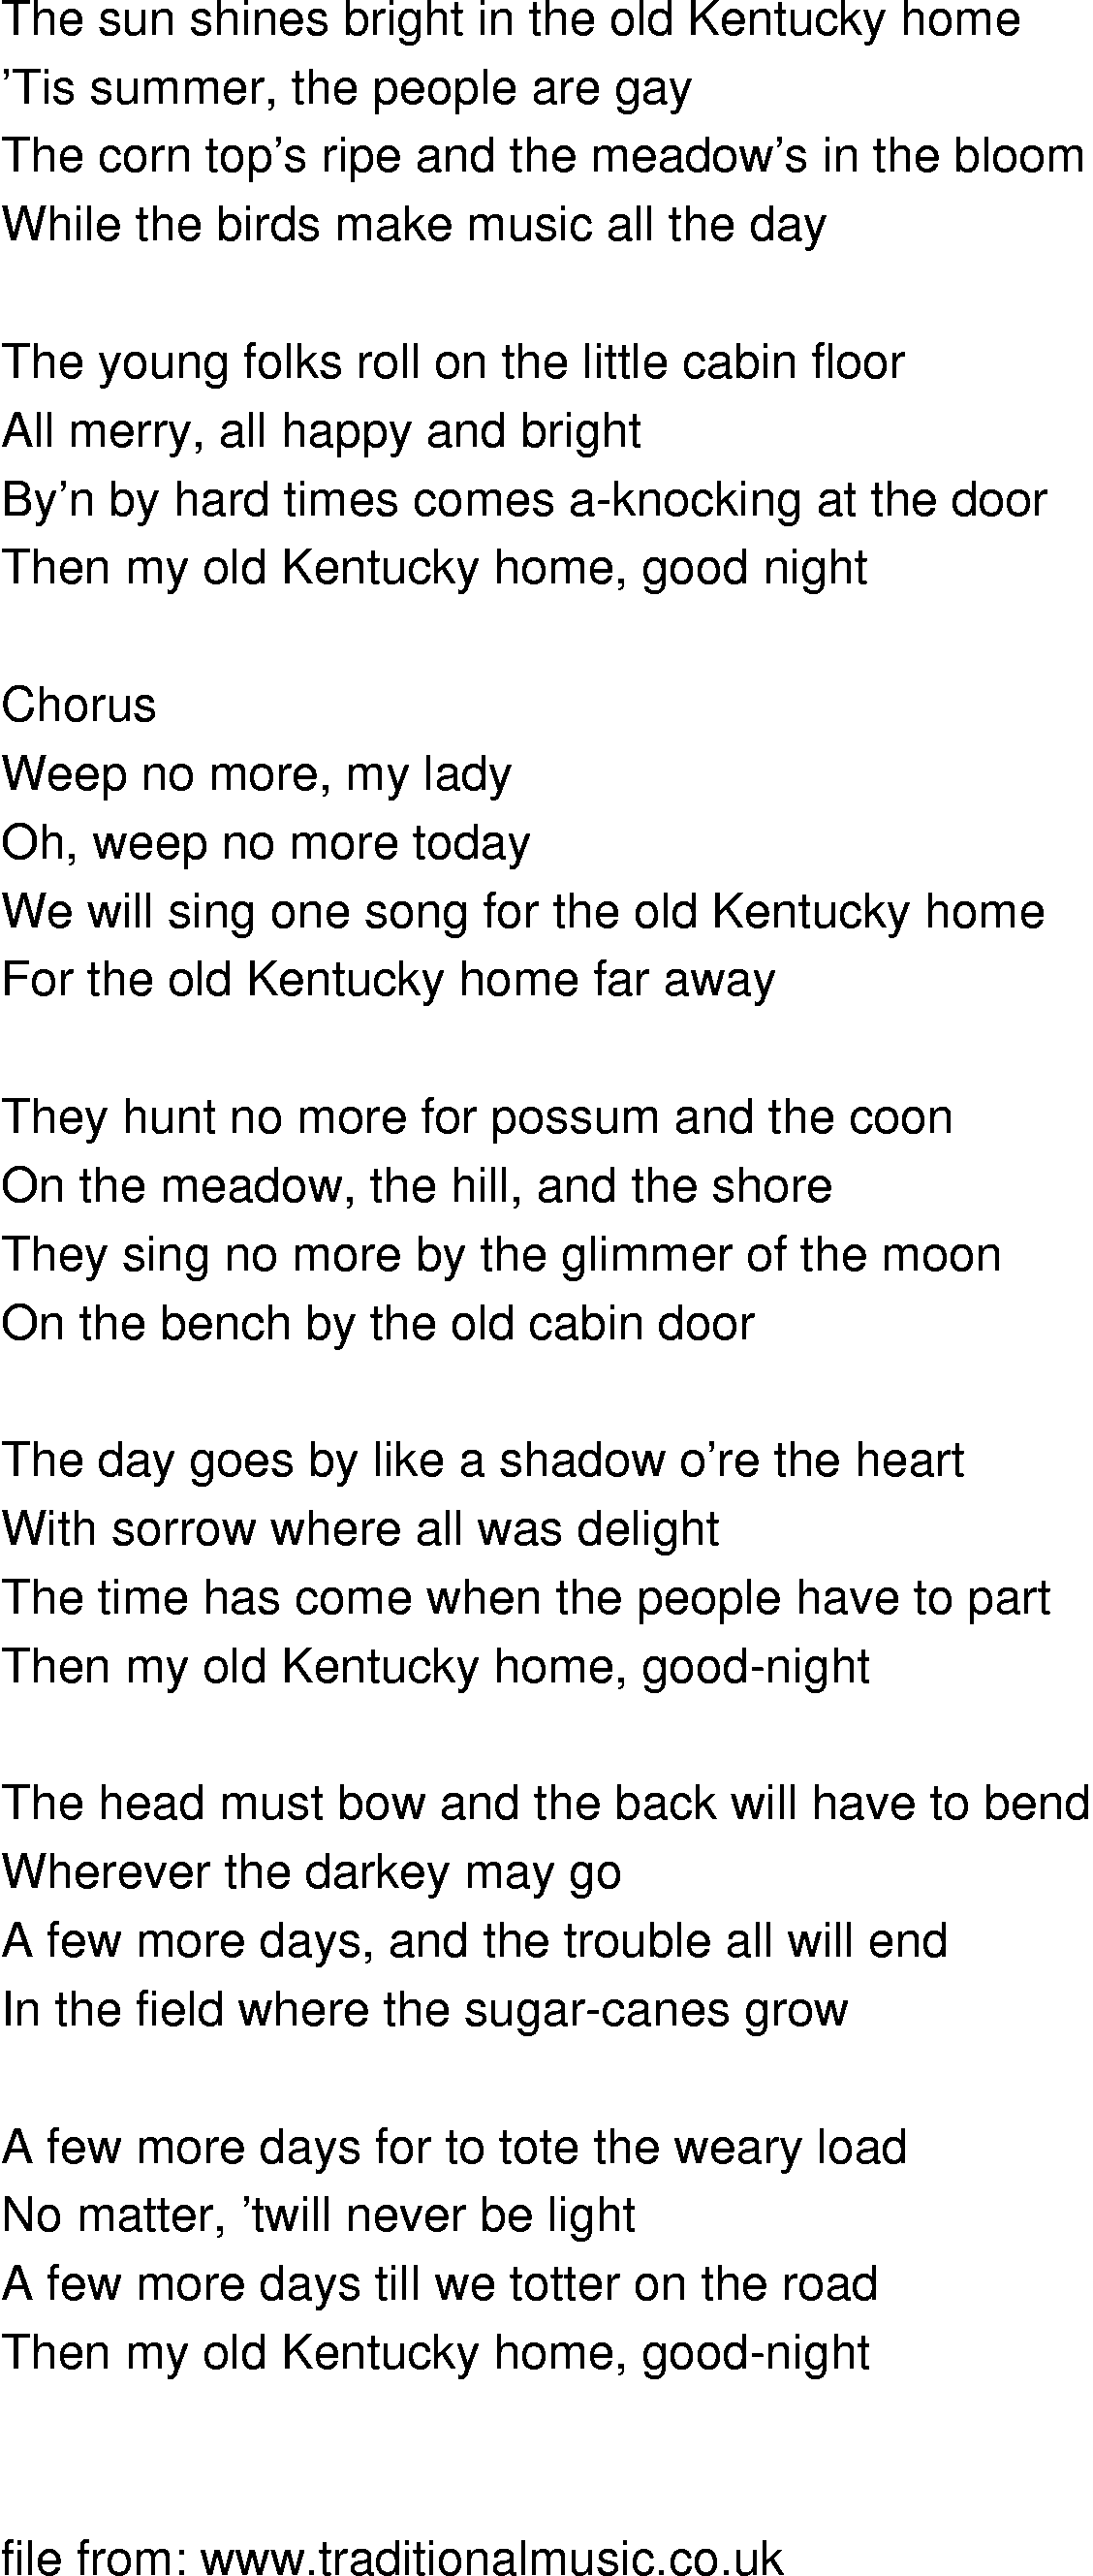 Old-Time (oldtimey) Song Lyrics - my old kentucky home